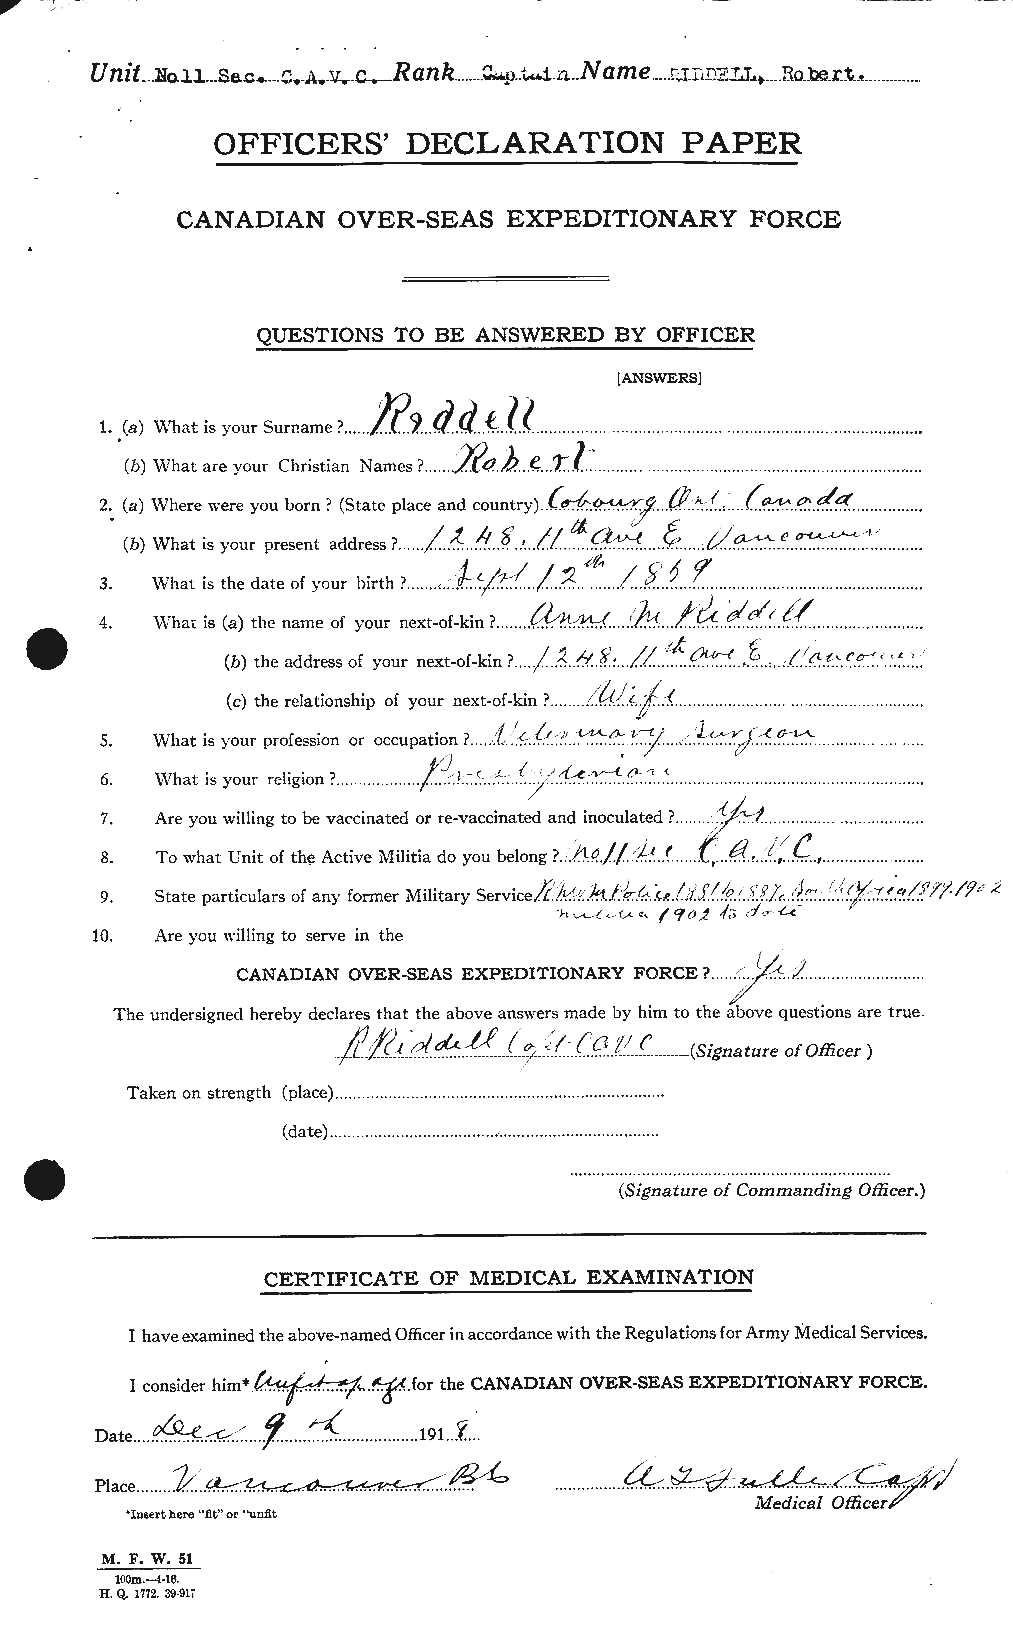 Personnel Records of the First World War - CEF 602029a